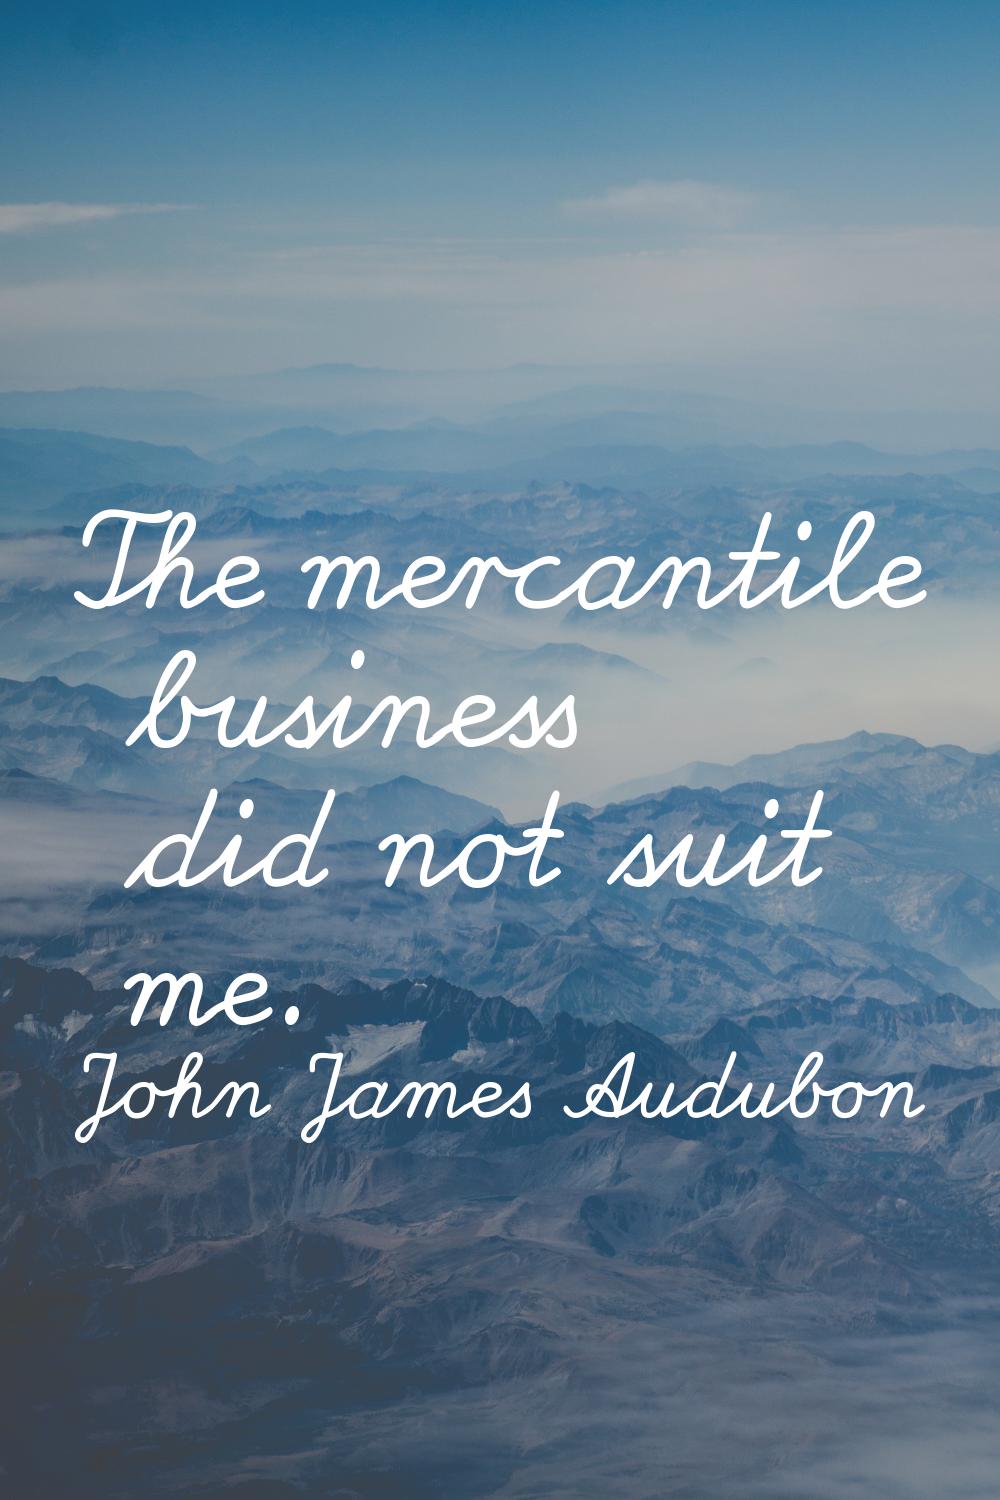 The mercantile business did not suit me.